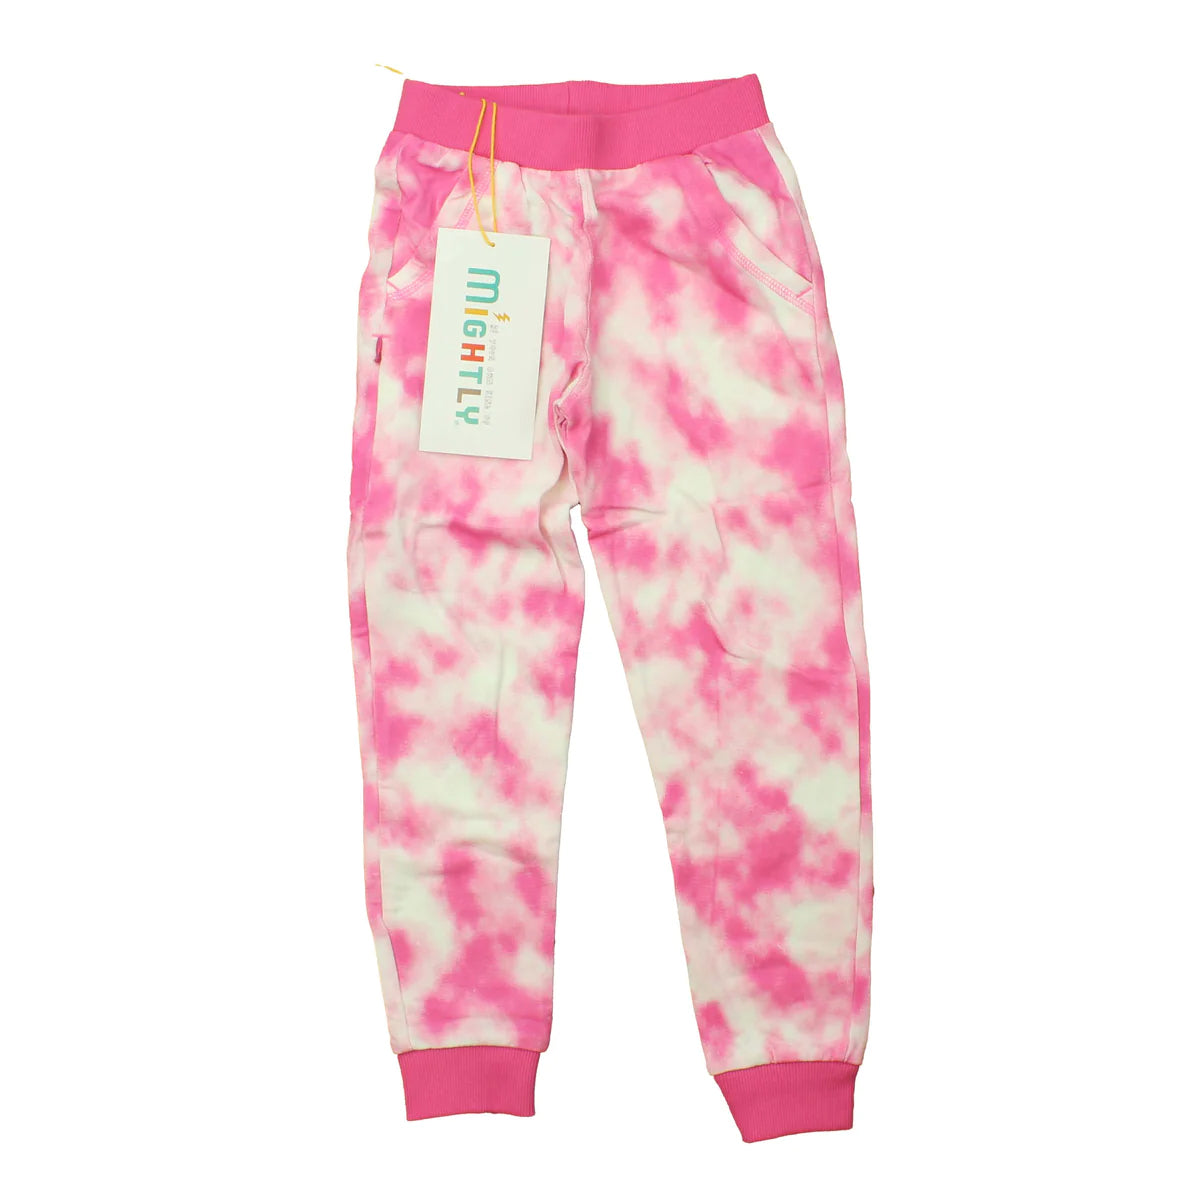 Pre-owned Pink Tie Dye Pants size: 2-5T